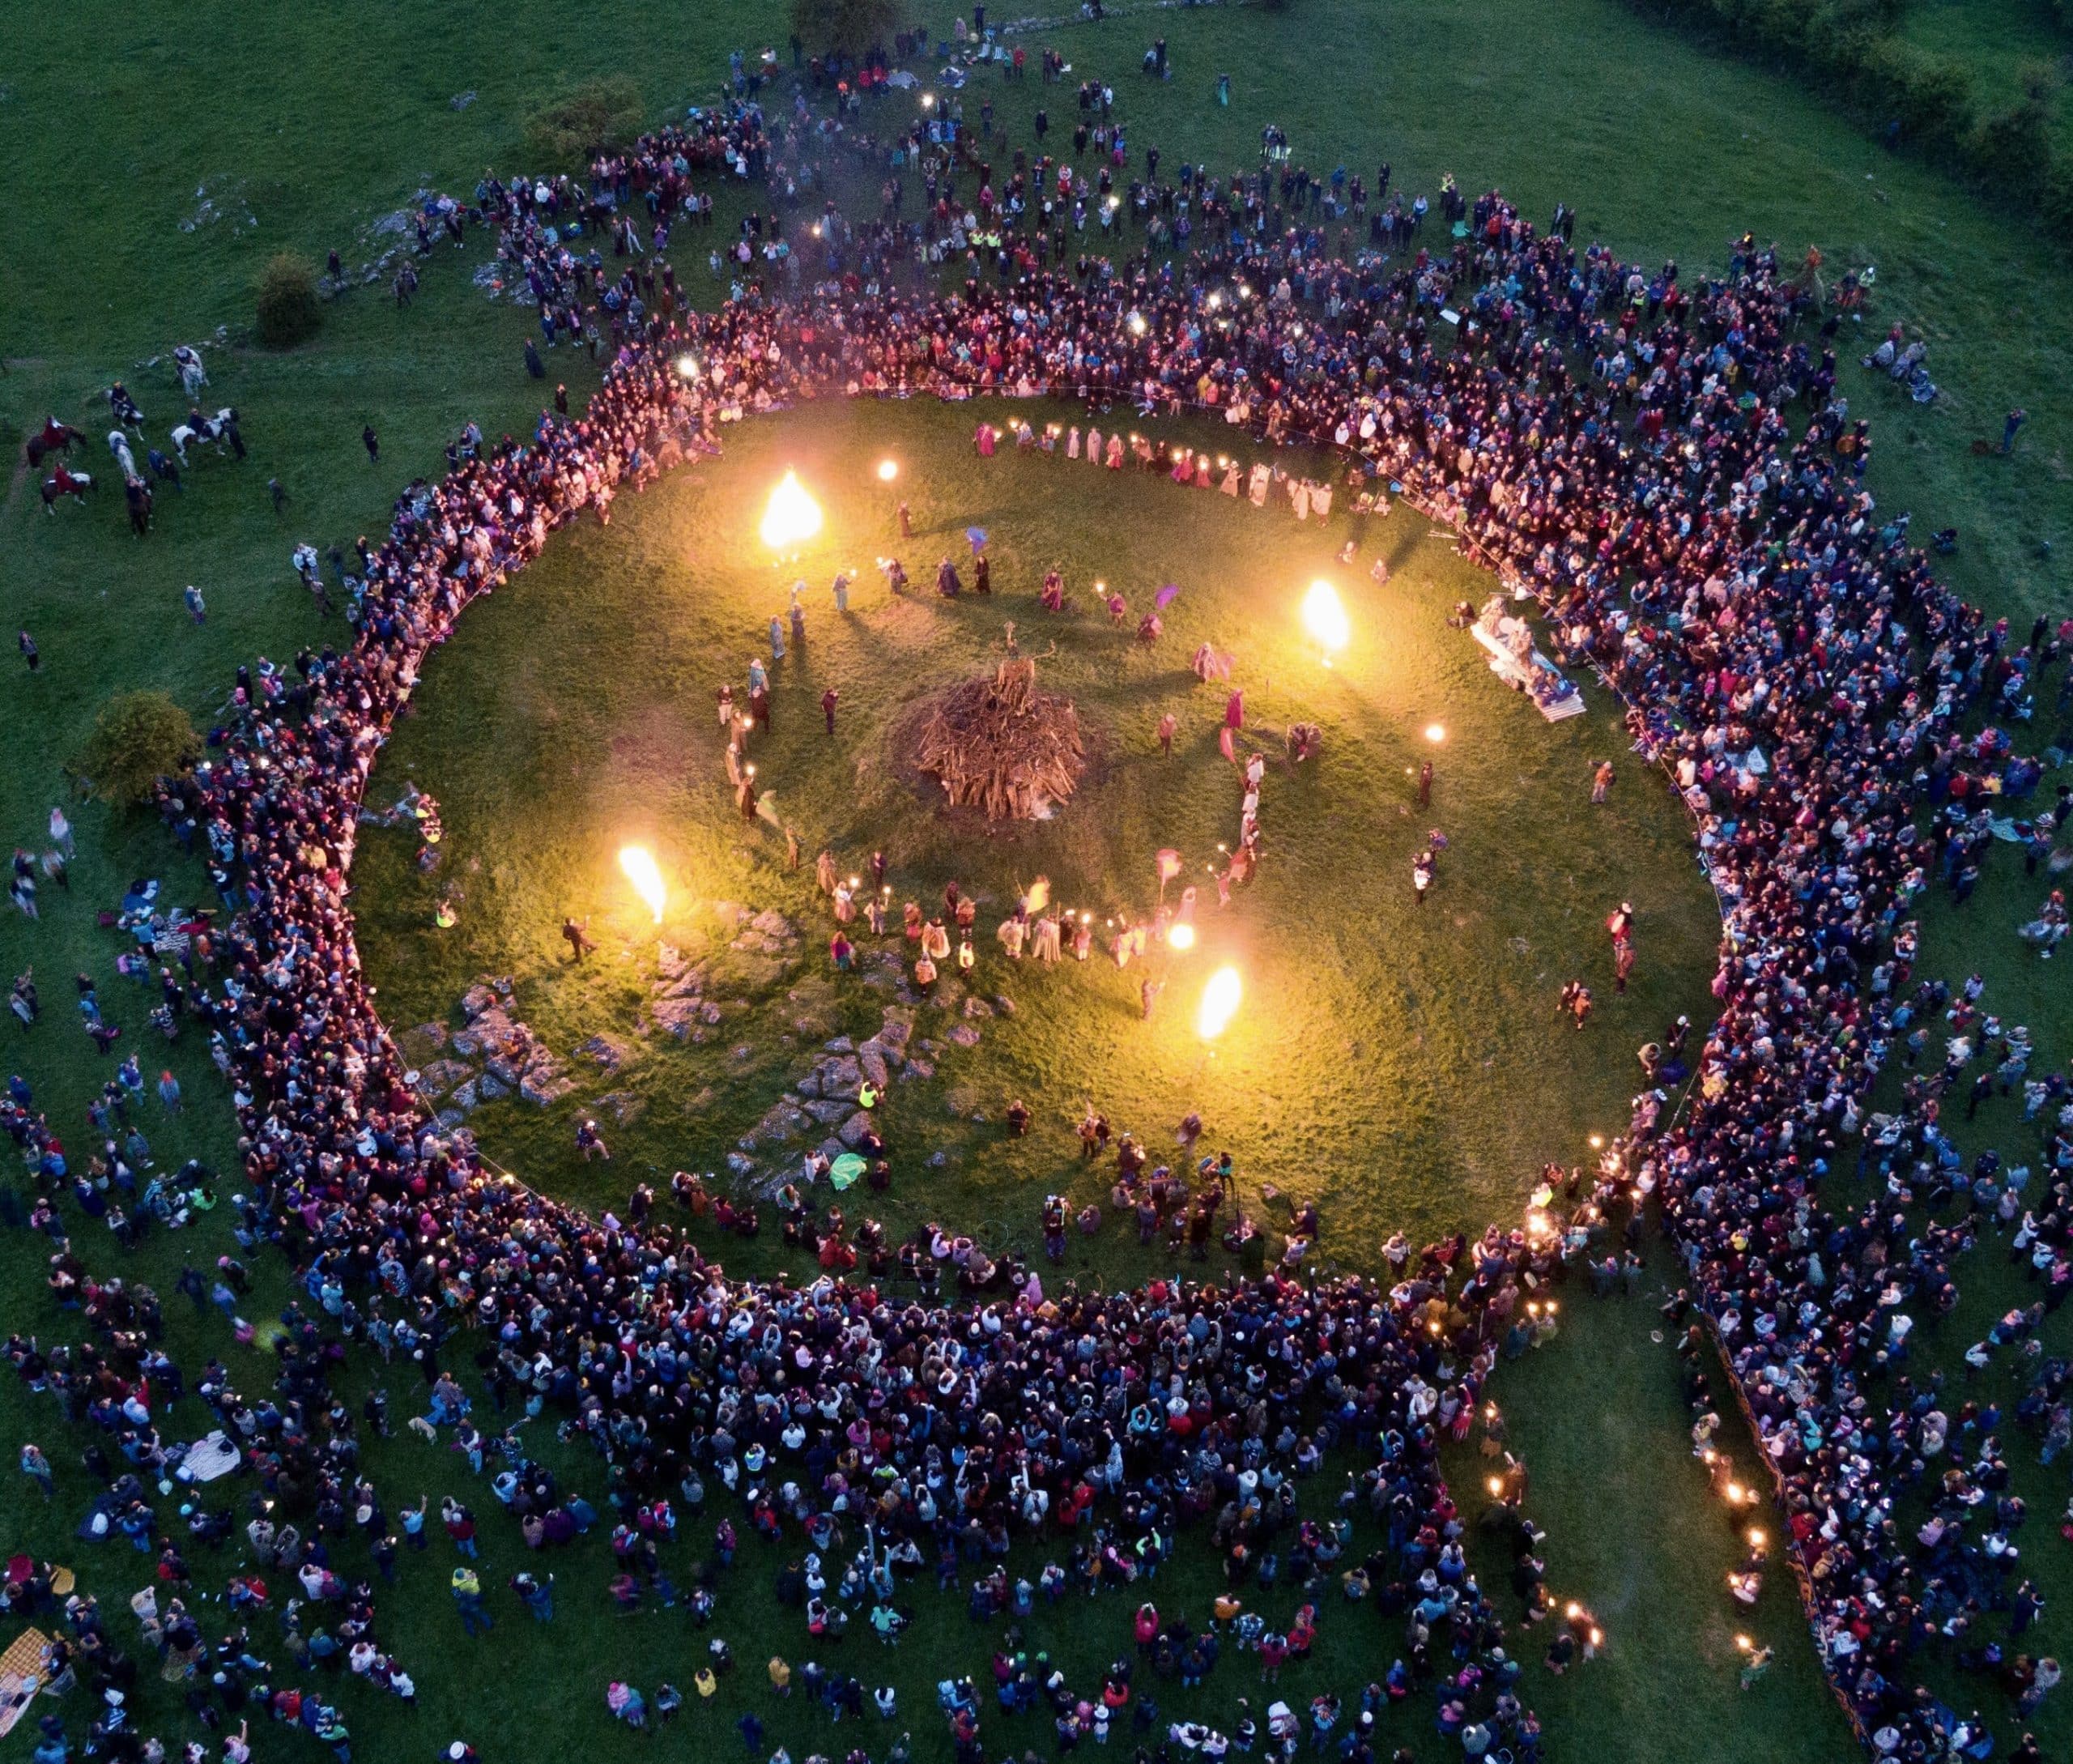 Bealtaine 2022 on the Hill of Uisneach where a great gathering took place celebrating our ancient heritage with lighting a great fire to welcome in the Summer.